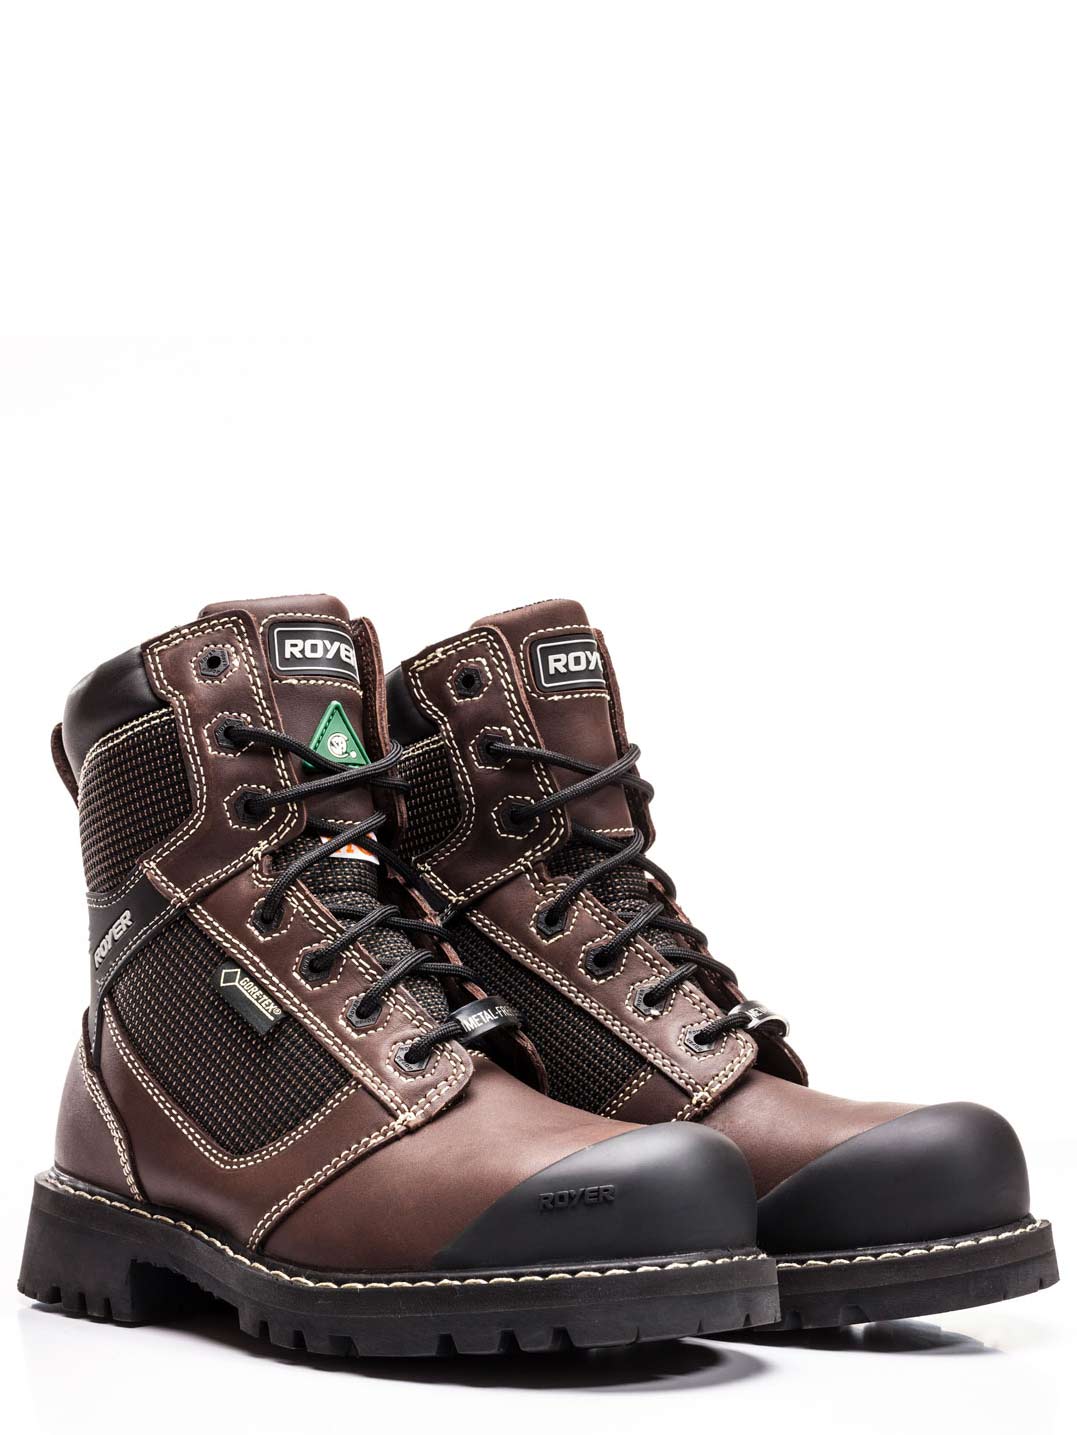 royer gore tex boots